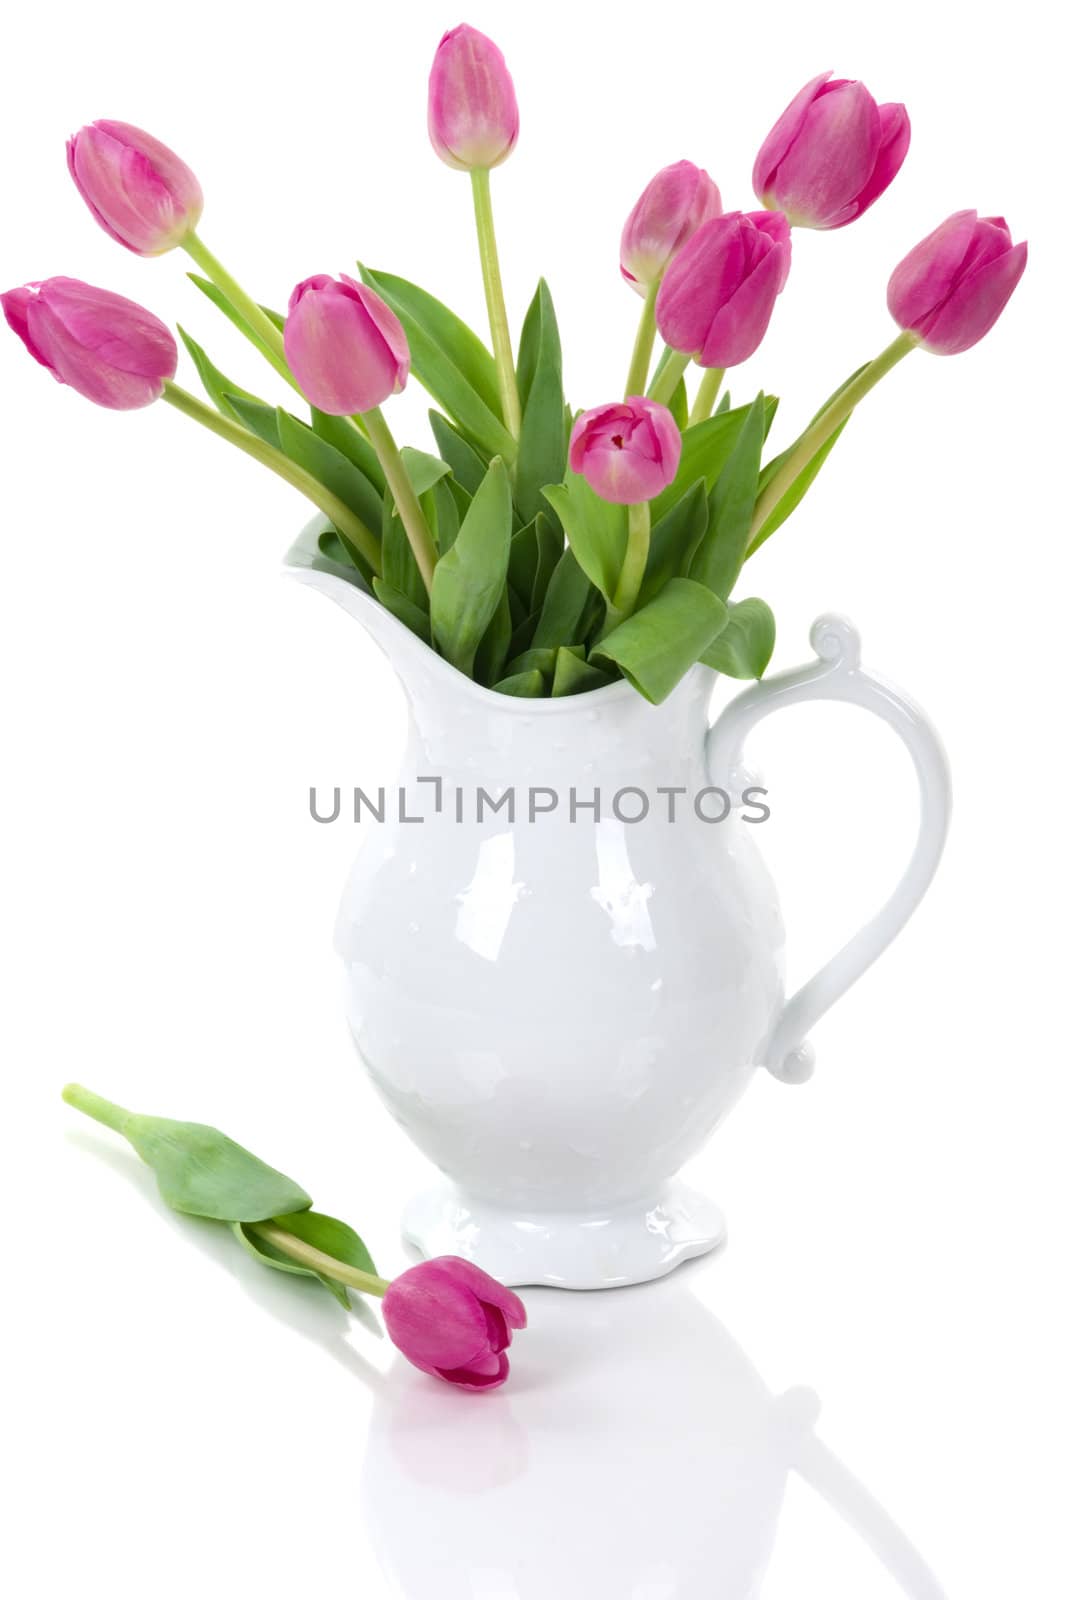 A bouquet of elegant tulips in a beautiful pitcher vase